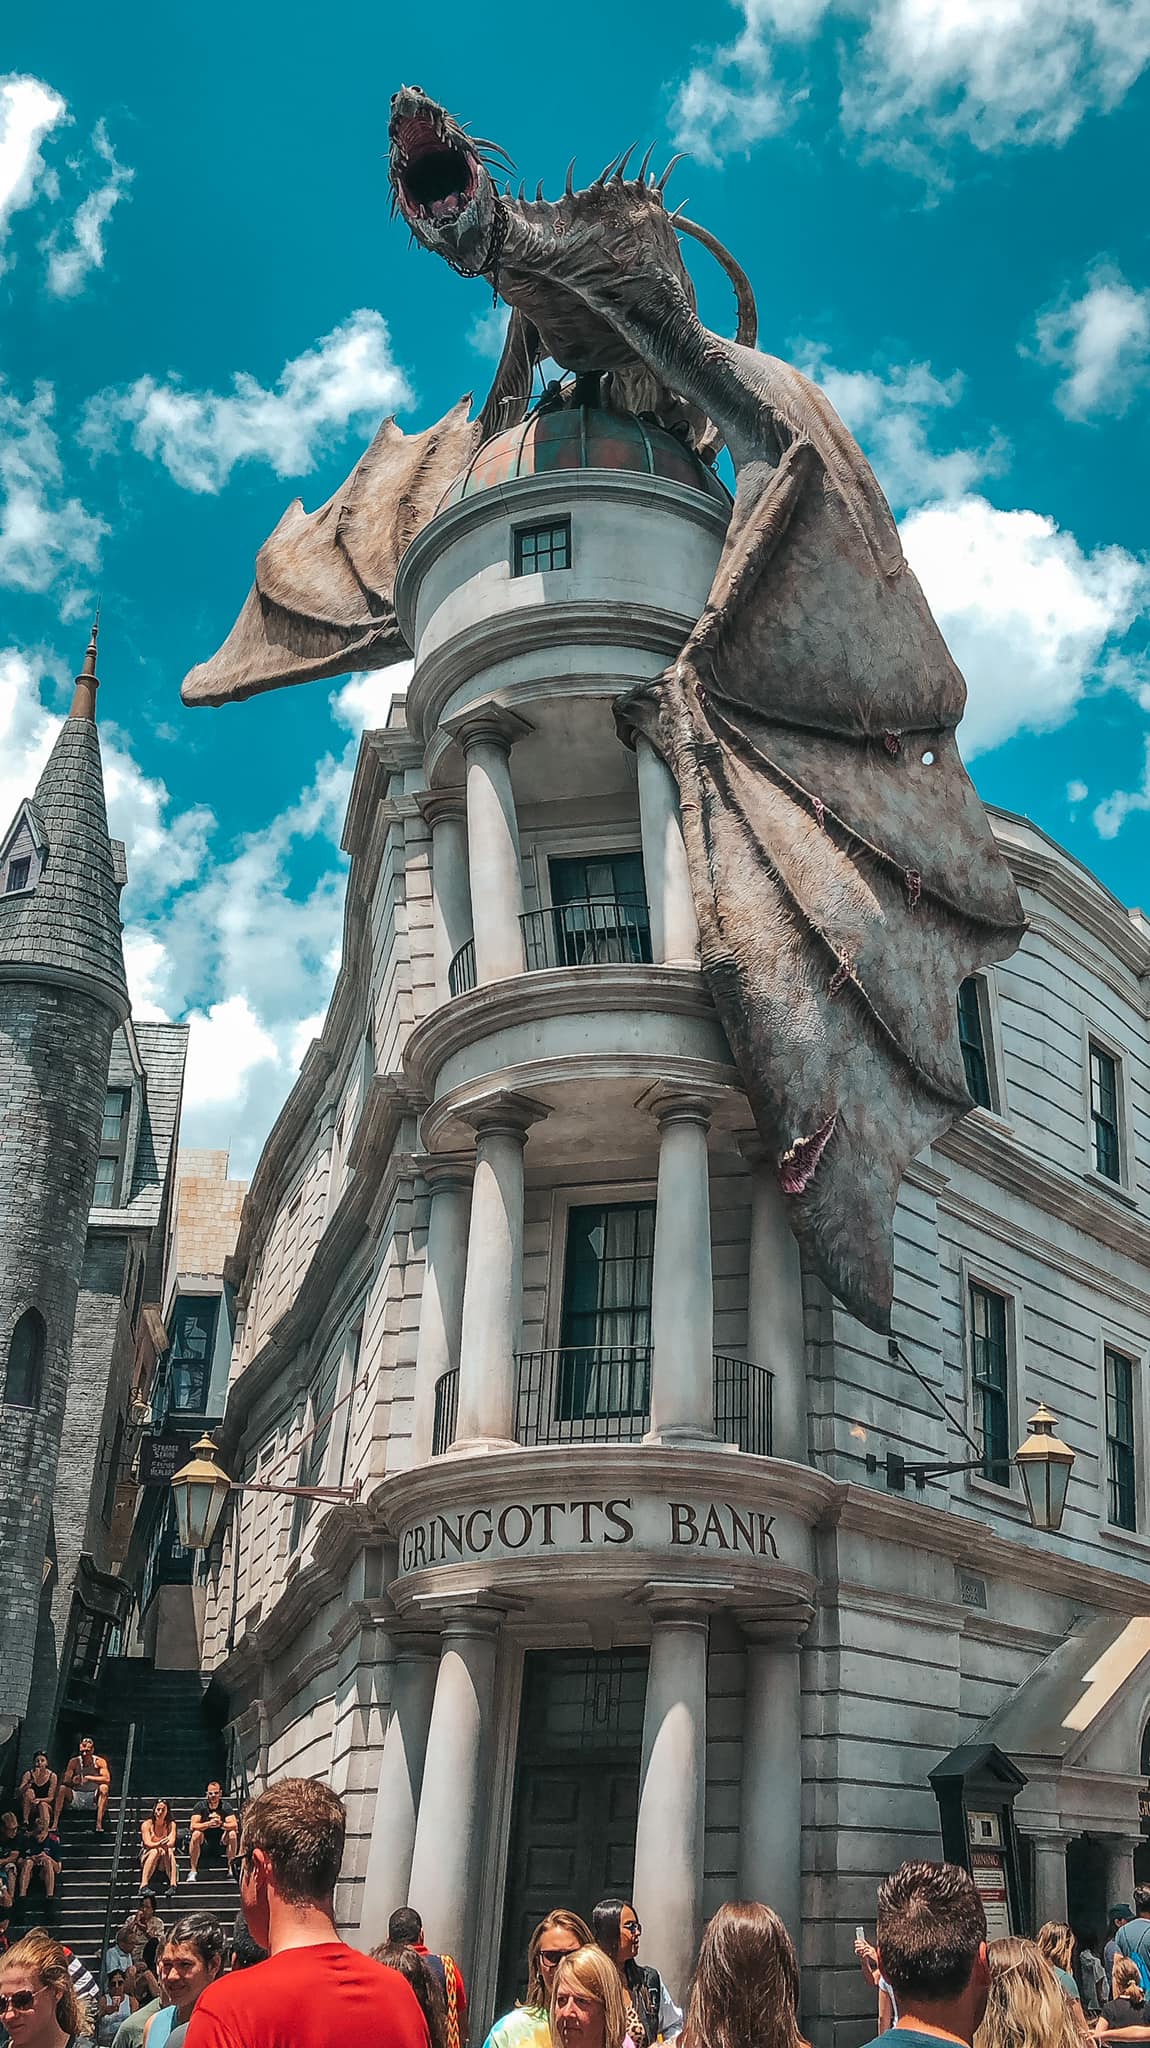 Gringotts Bank at Harry Potter World in Universal Orlando for a weekend getaways from Tampa